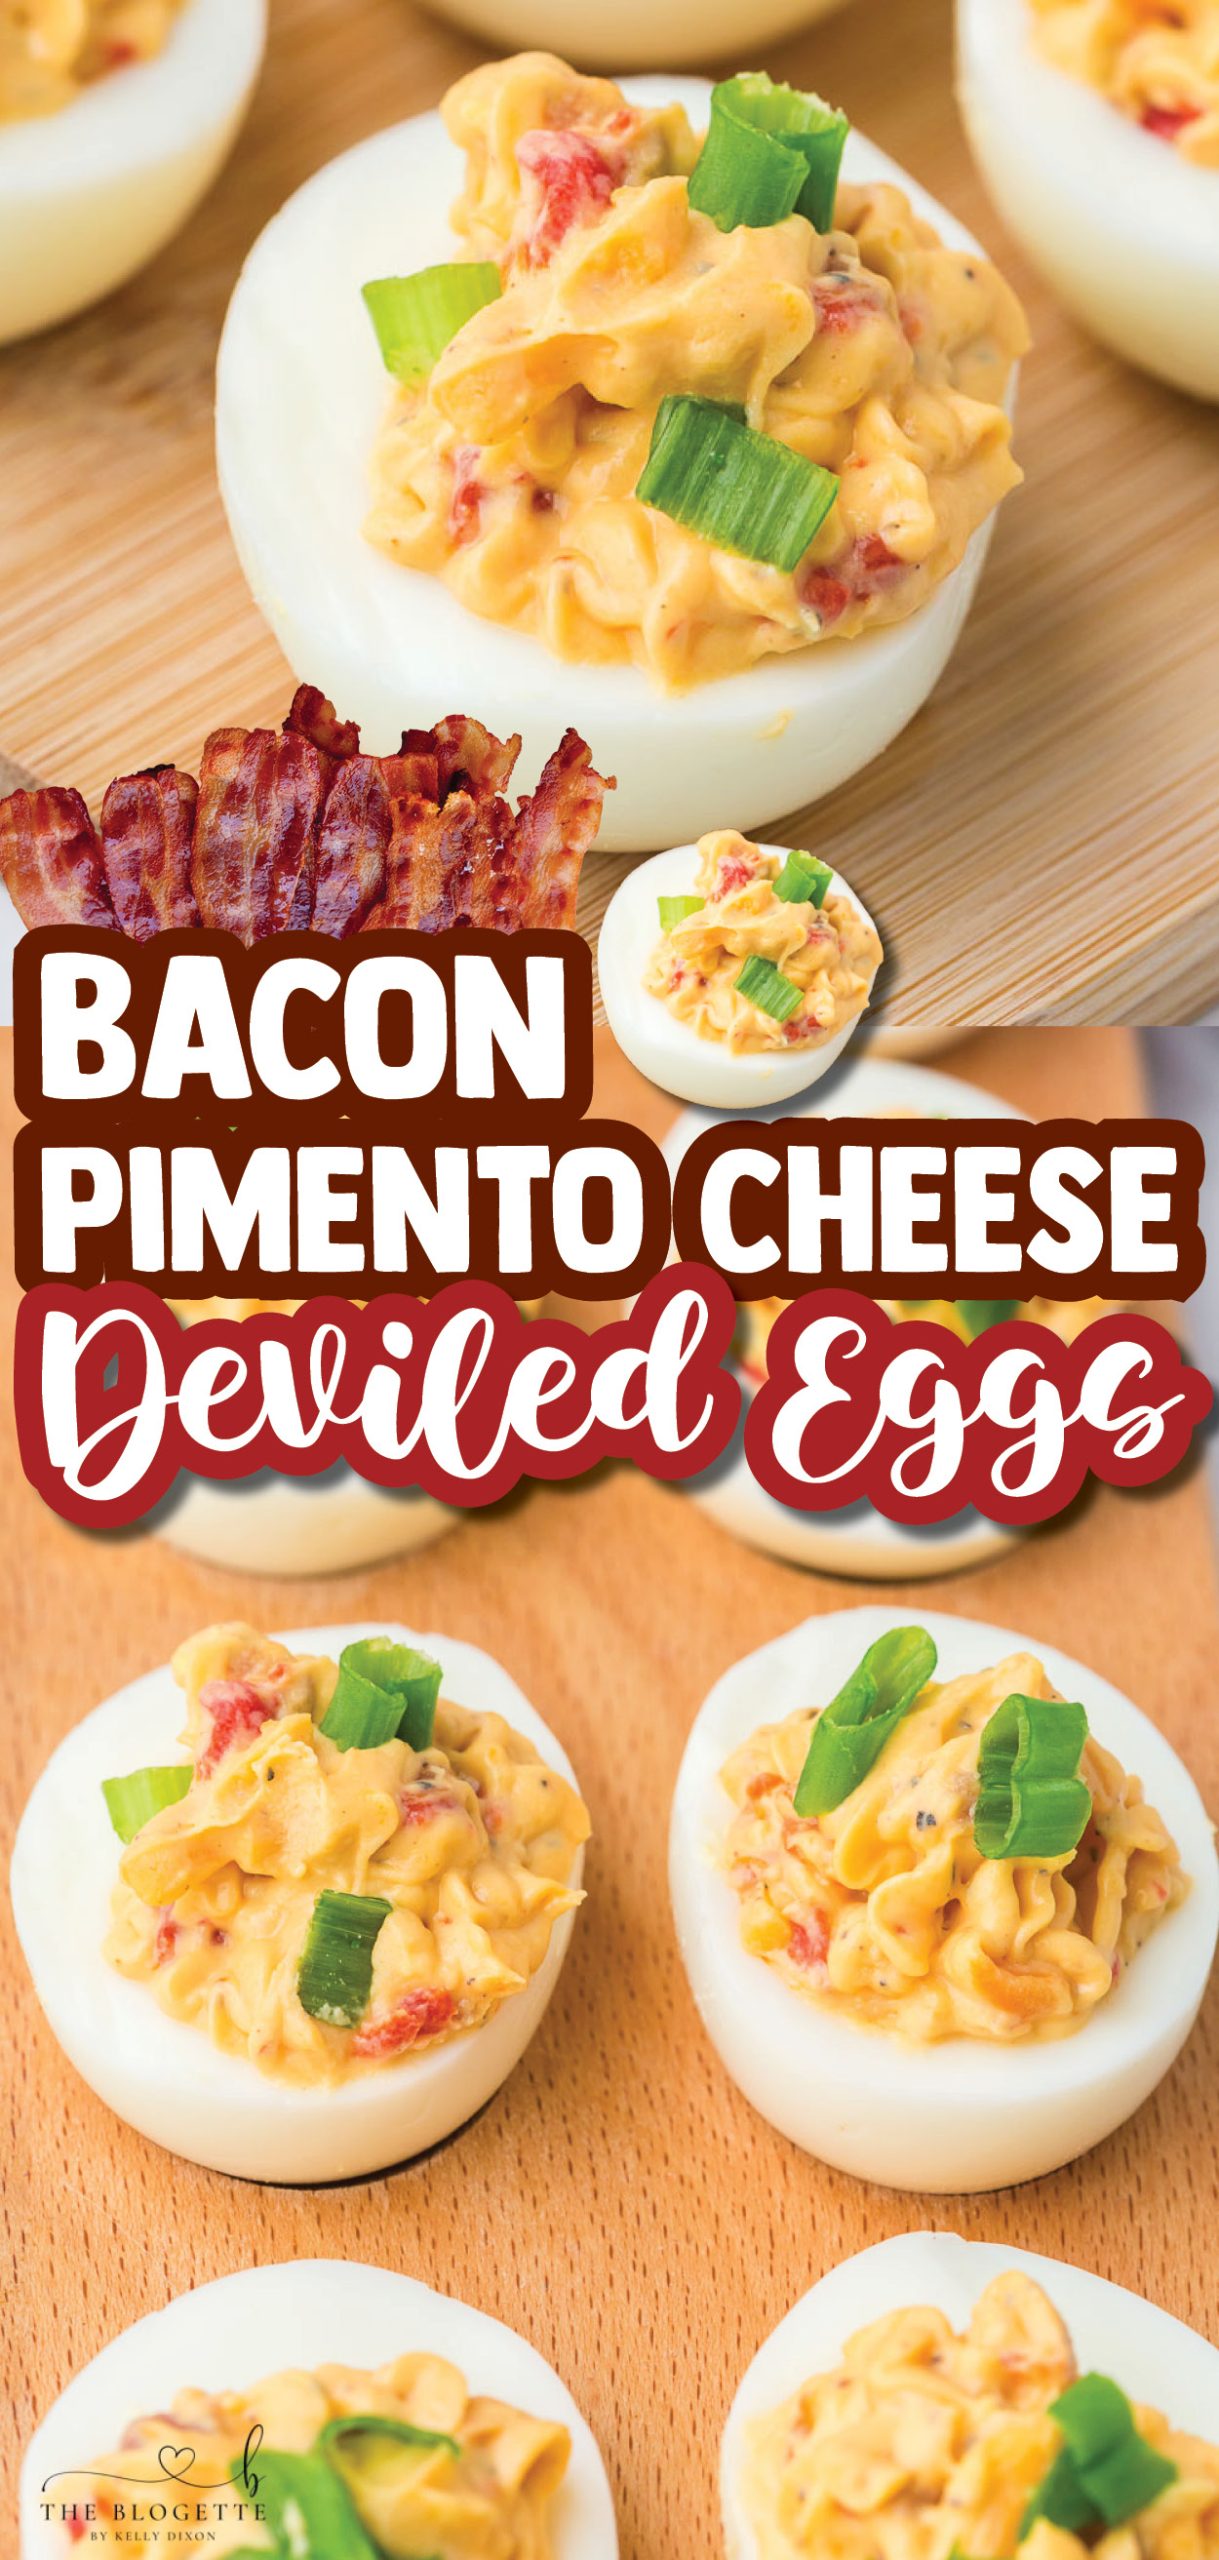 Bacon Pimento Deviled Eggs are a delicious twist on a classic deviled egg recipe! Deviled egg whites filled with a creamy pimento cheese mixture and topped with bacon. This is a gorgeous appetizer for a holiday table or any brunch gathering.